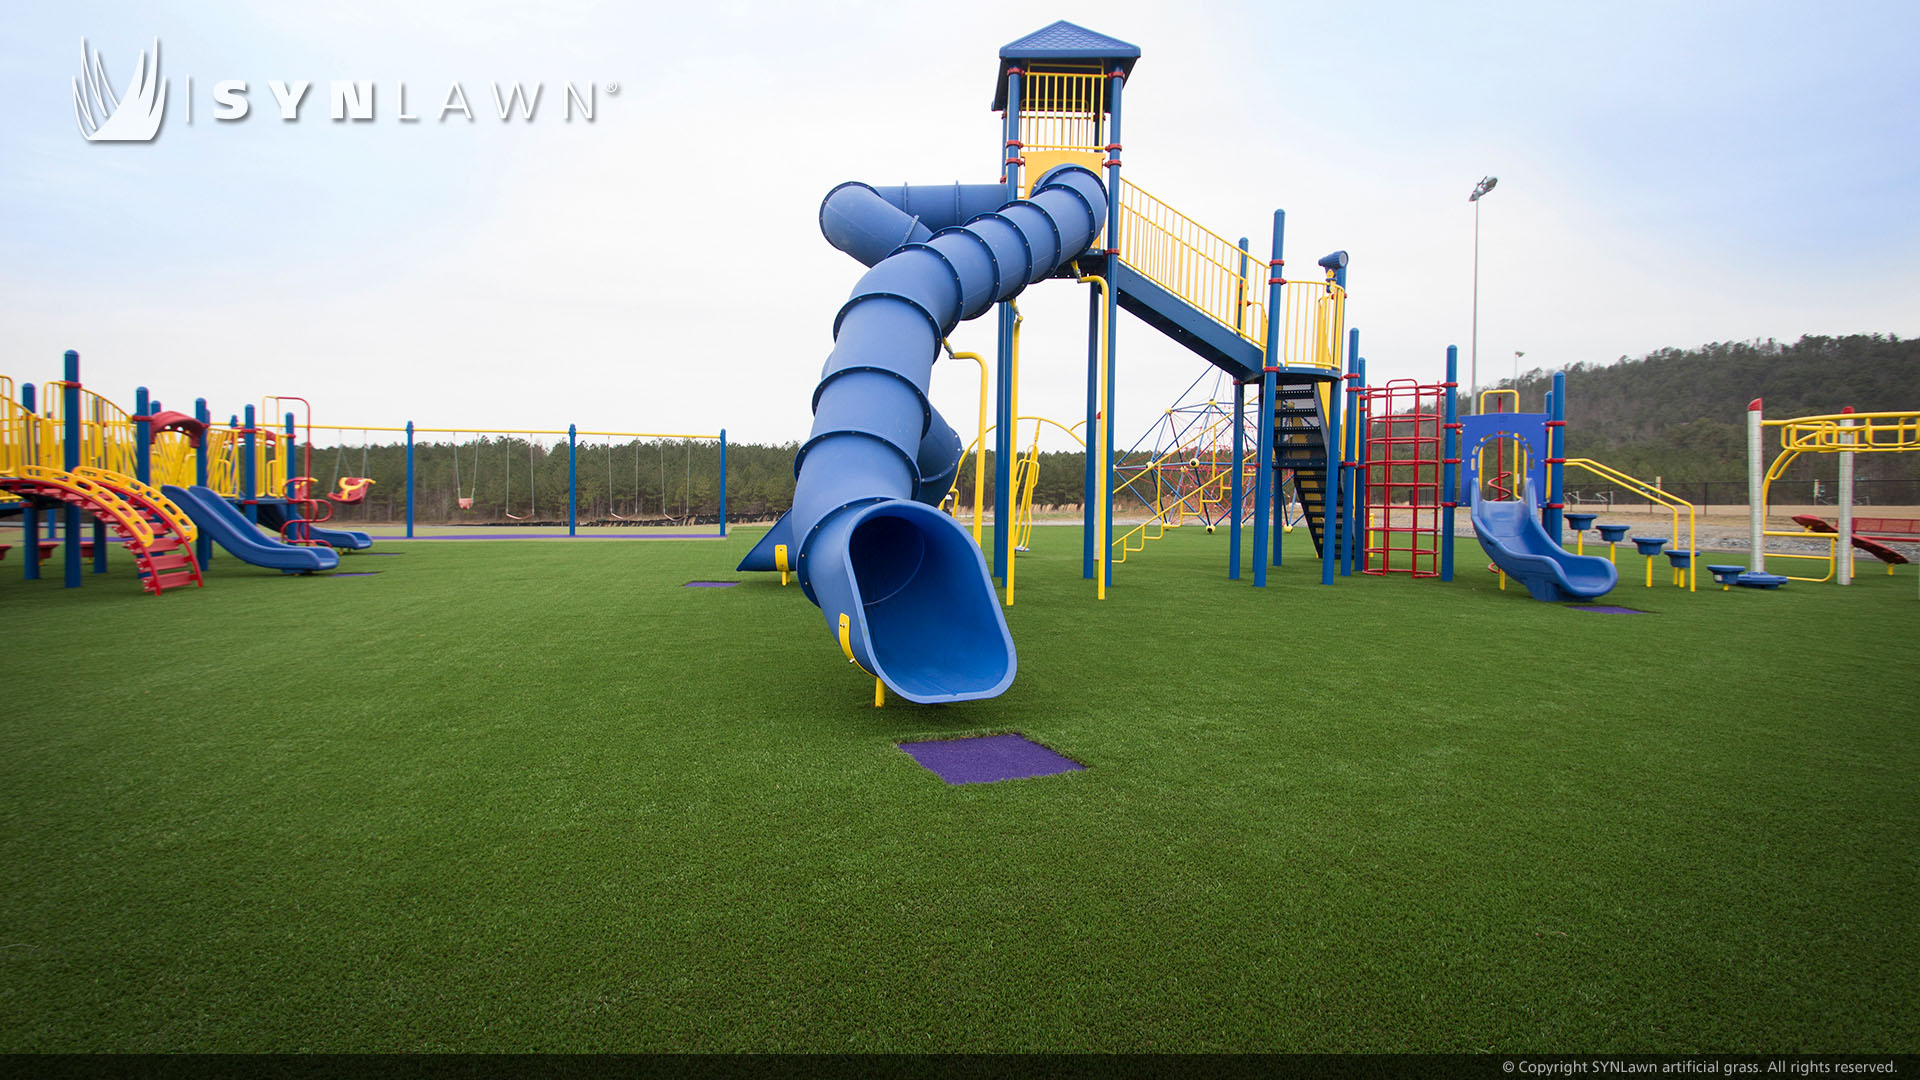 Blue slide and jungle gym on artificial playground grass